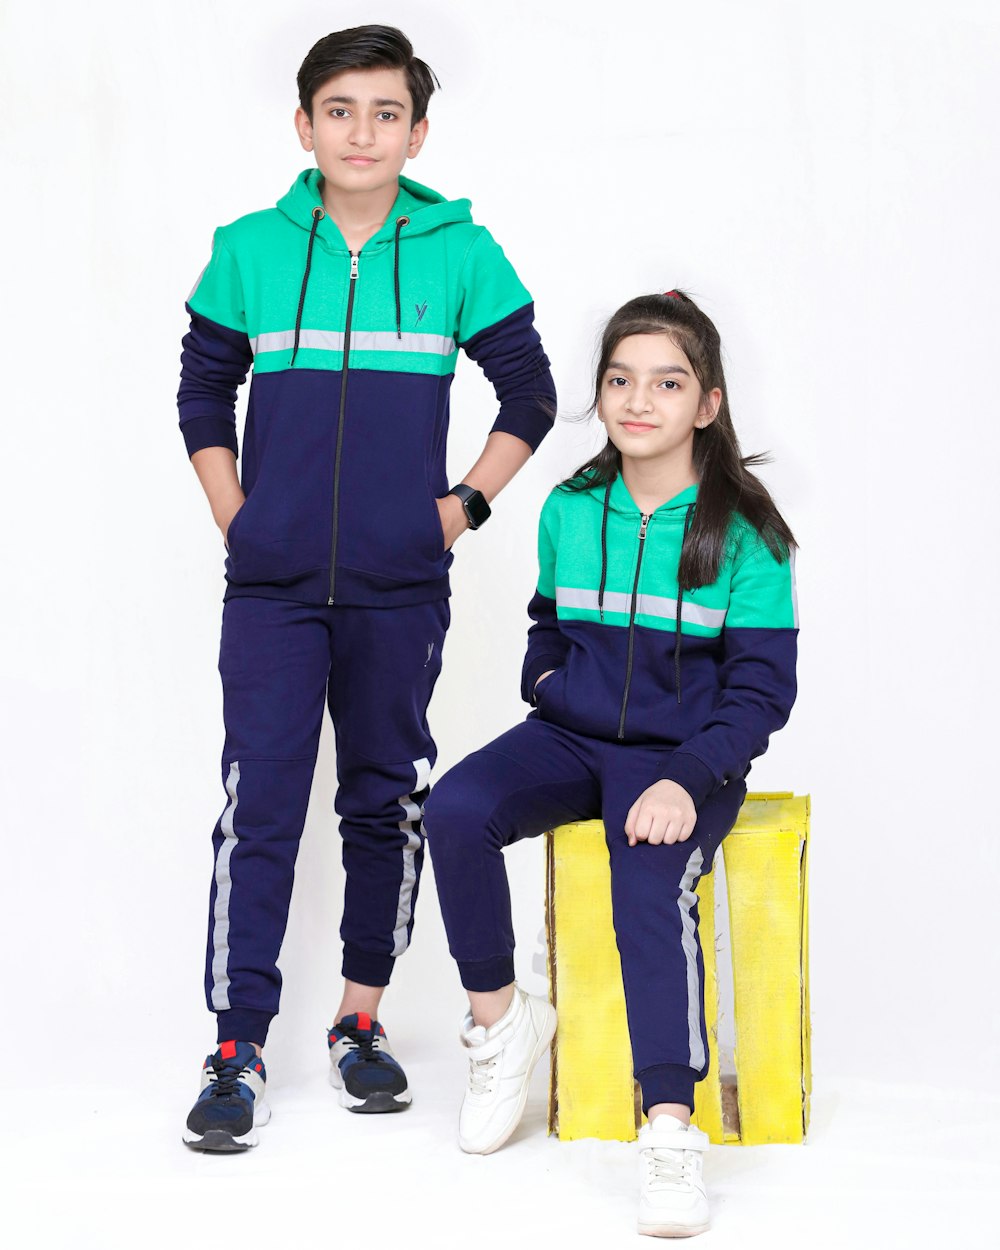 a boy and a girl in matching tracksuits